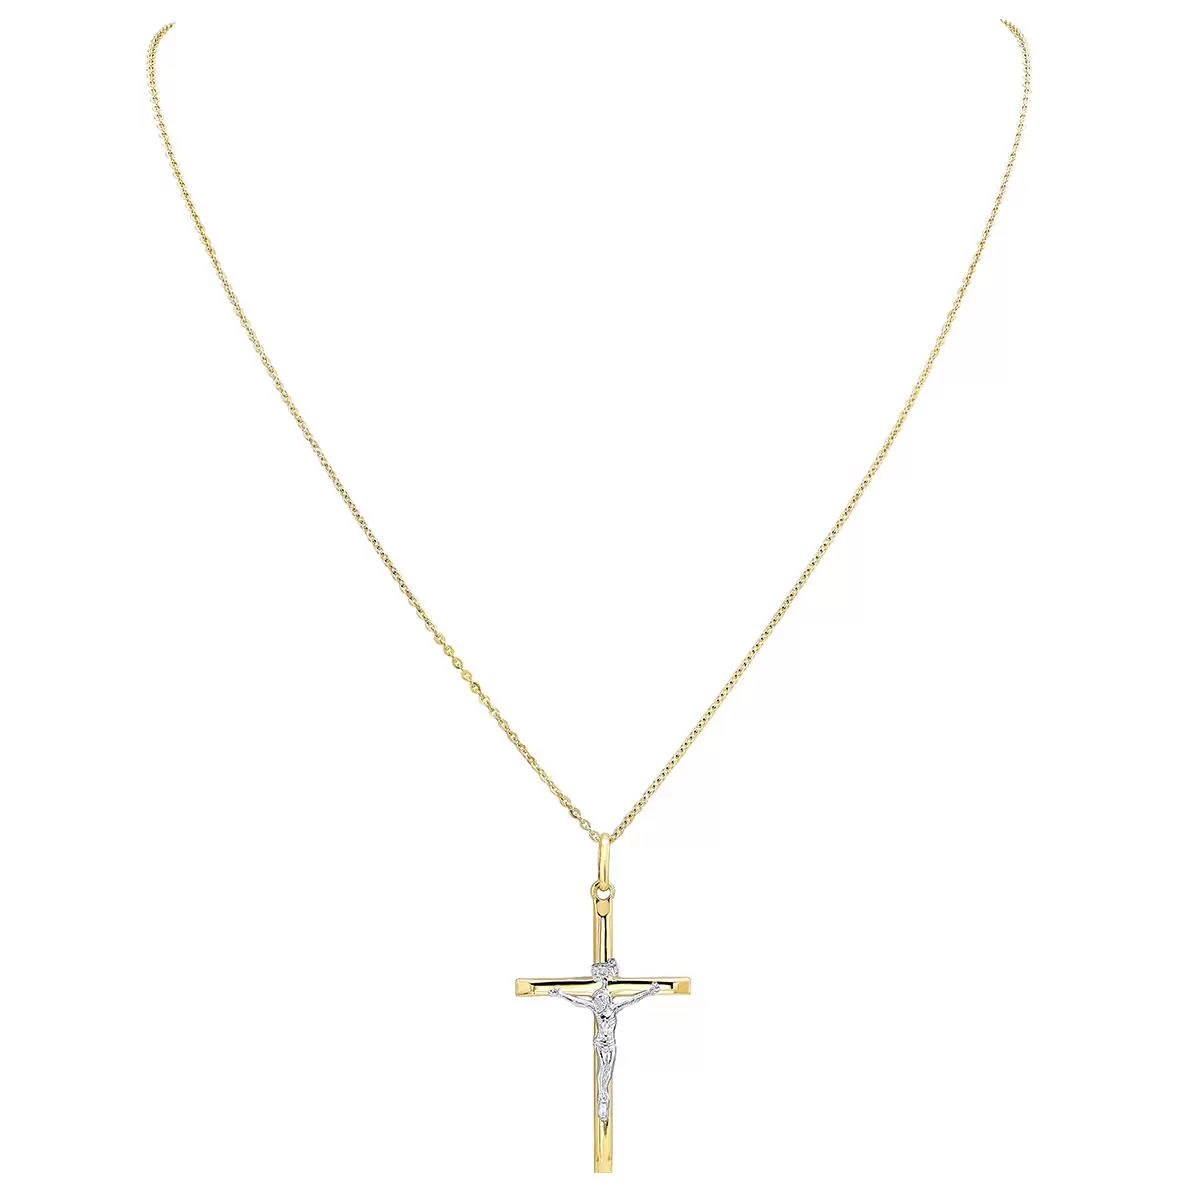 14KT White and Yellow Gold Cross Pendant on Chain